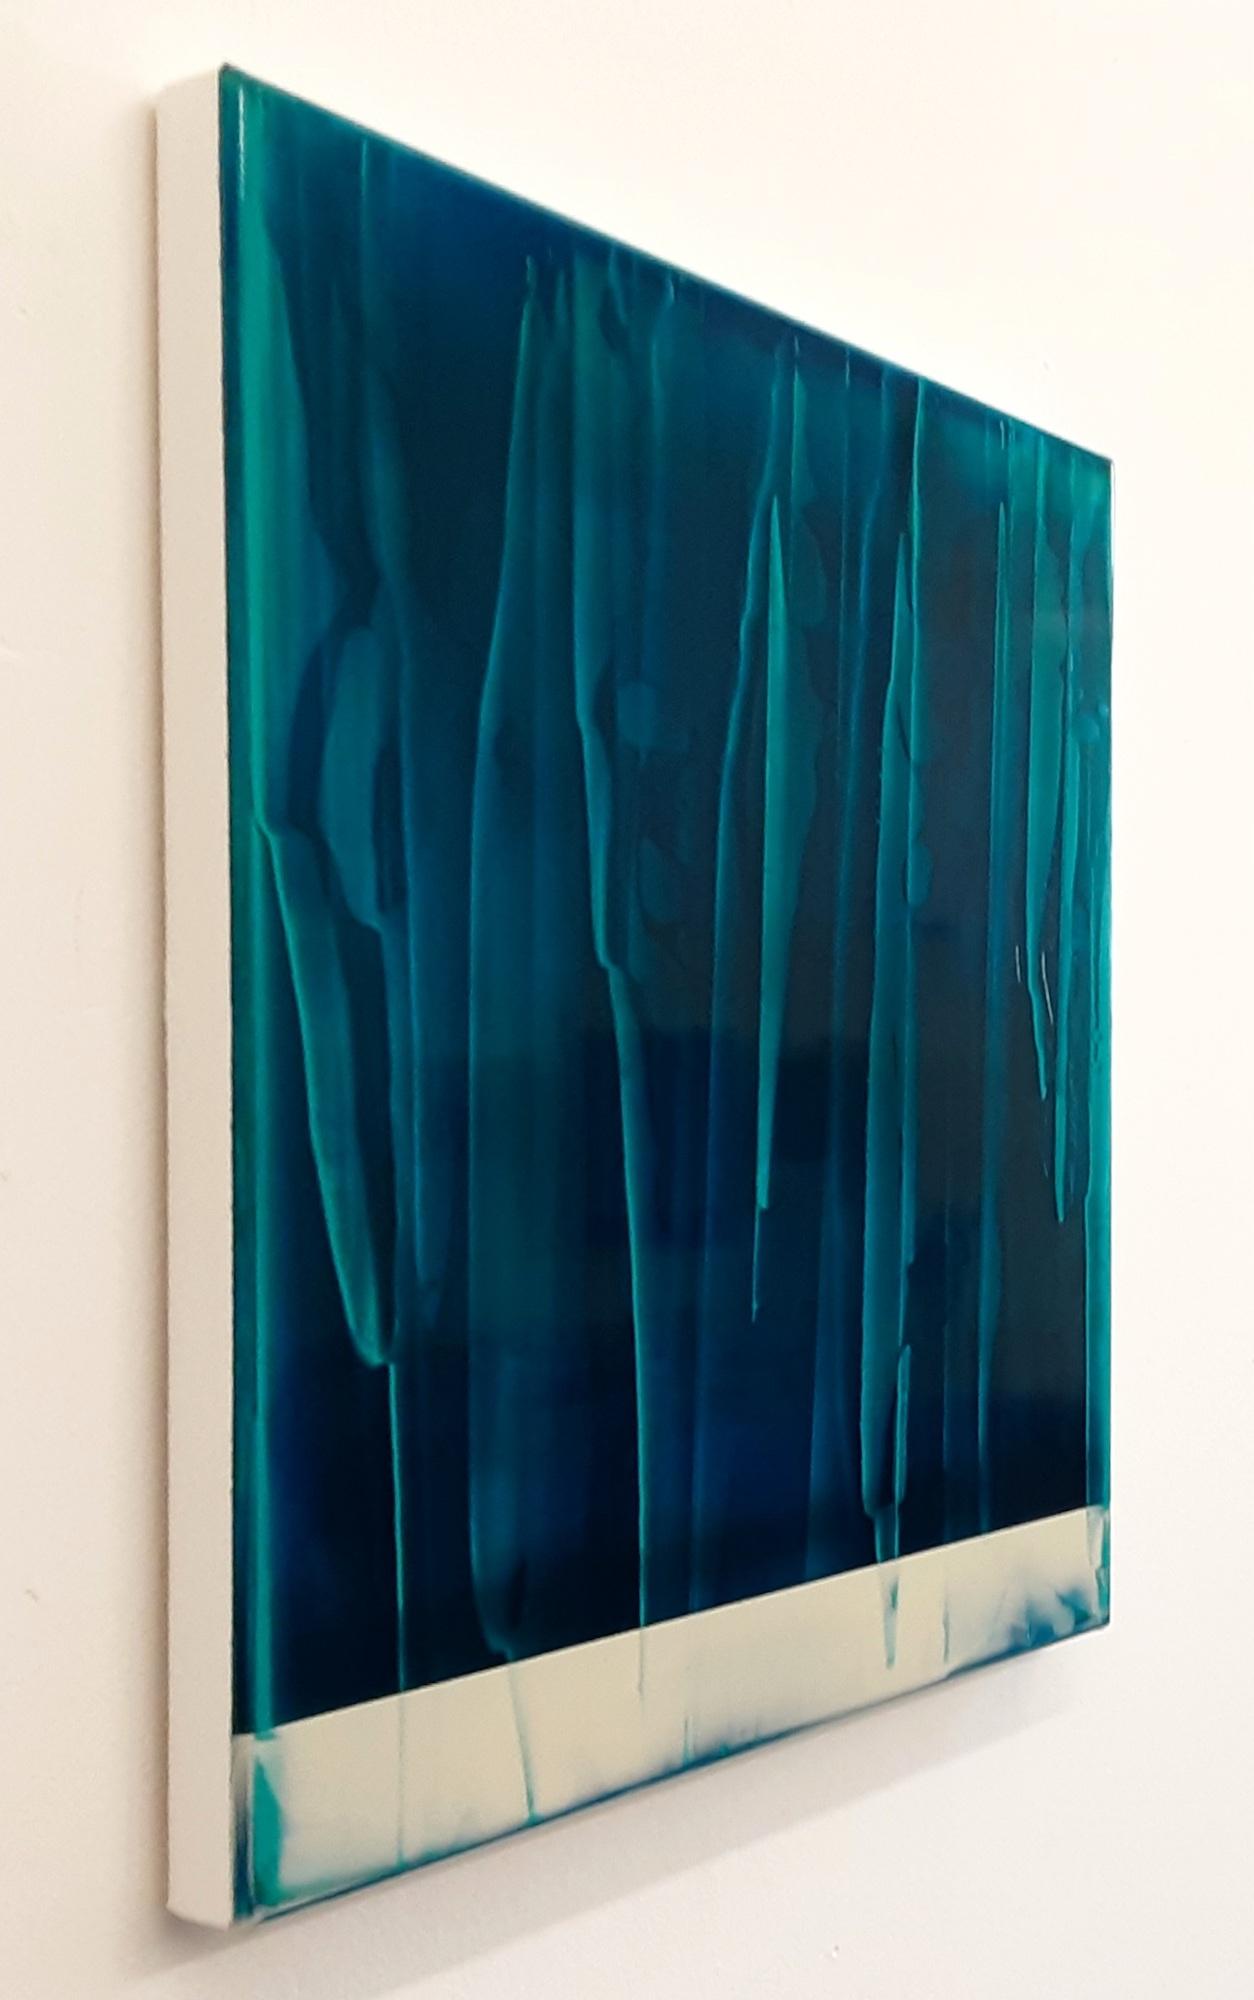 Echoes (1/19) by James Lumsden - Abstract colour painting, blue tones, gloss For Sale 4